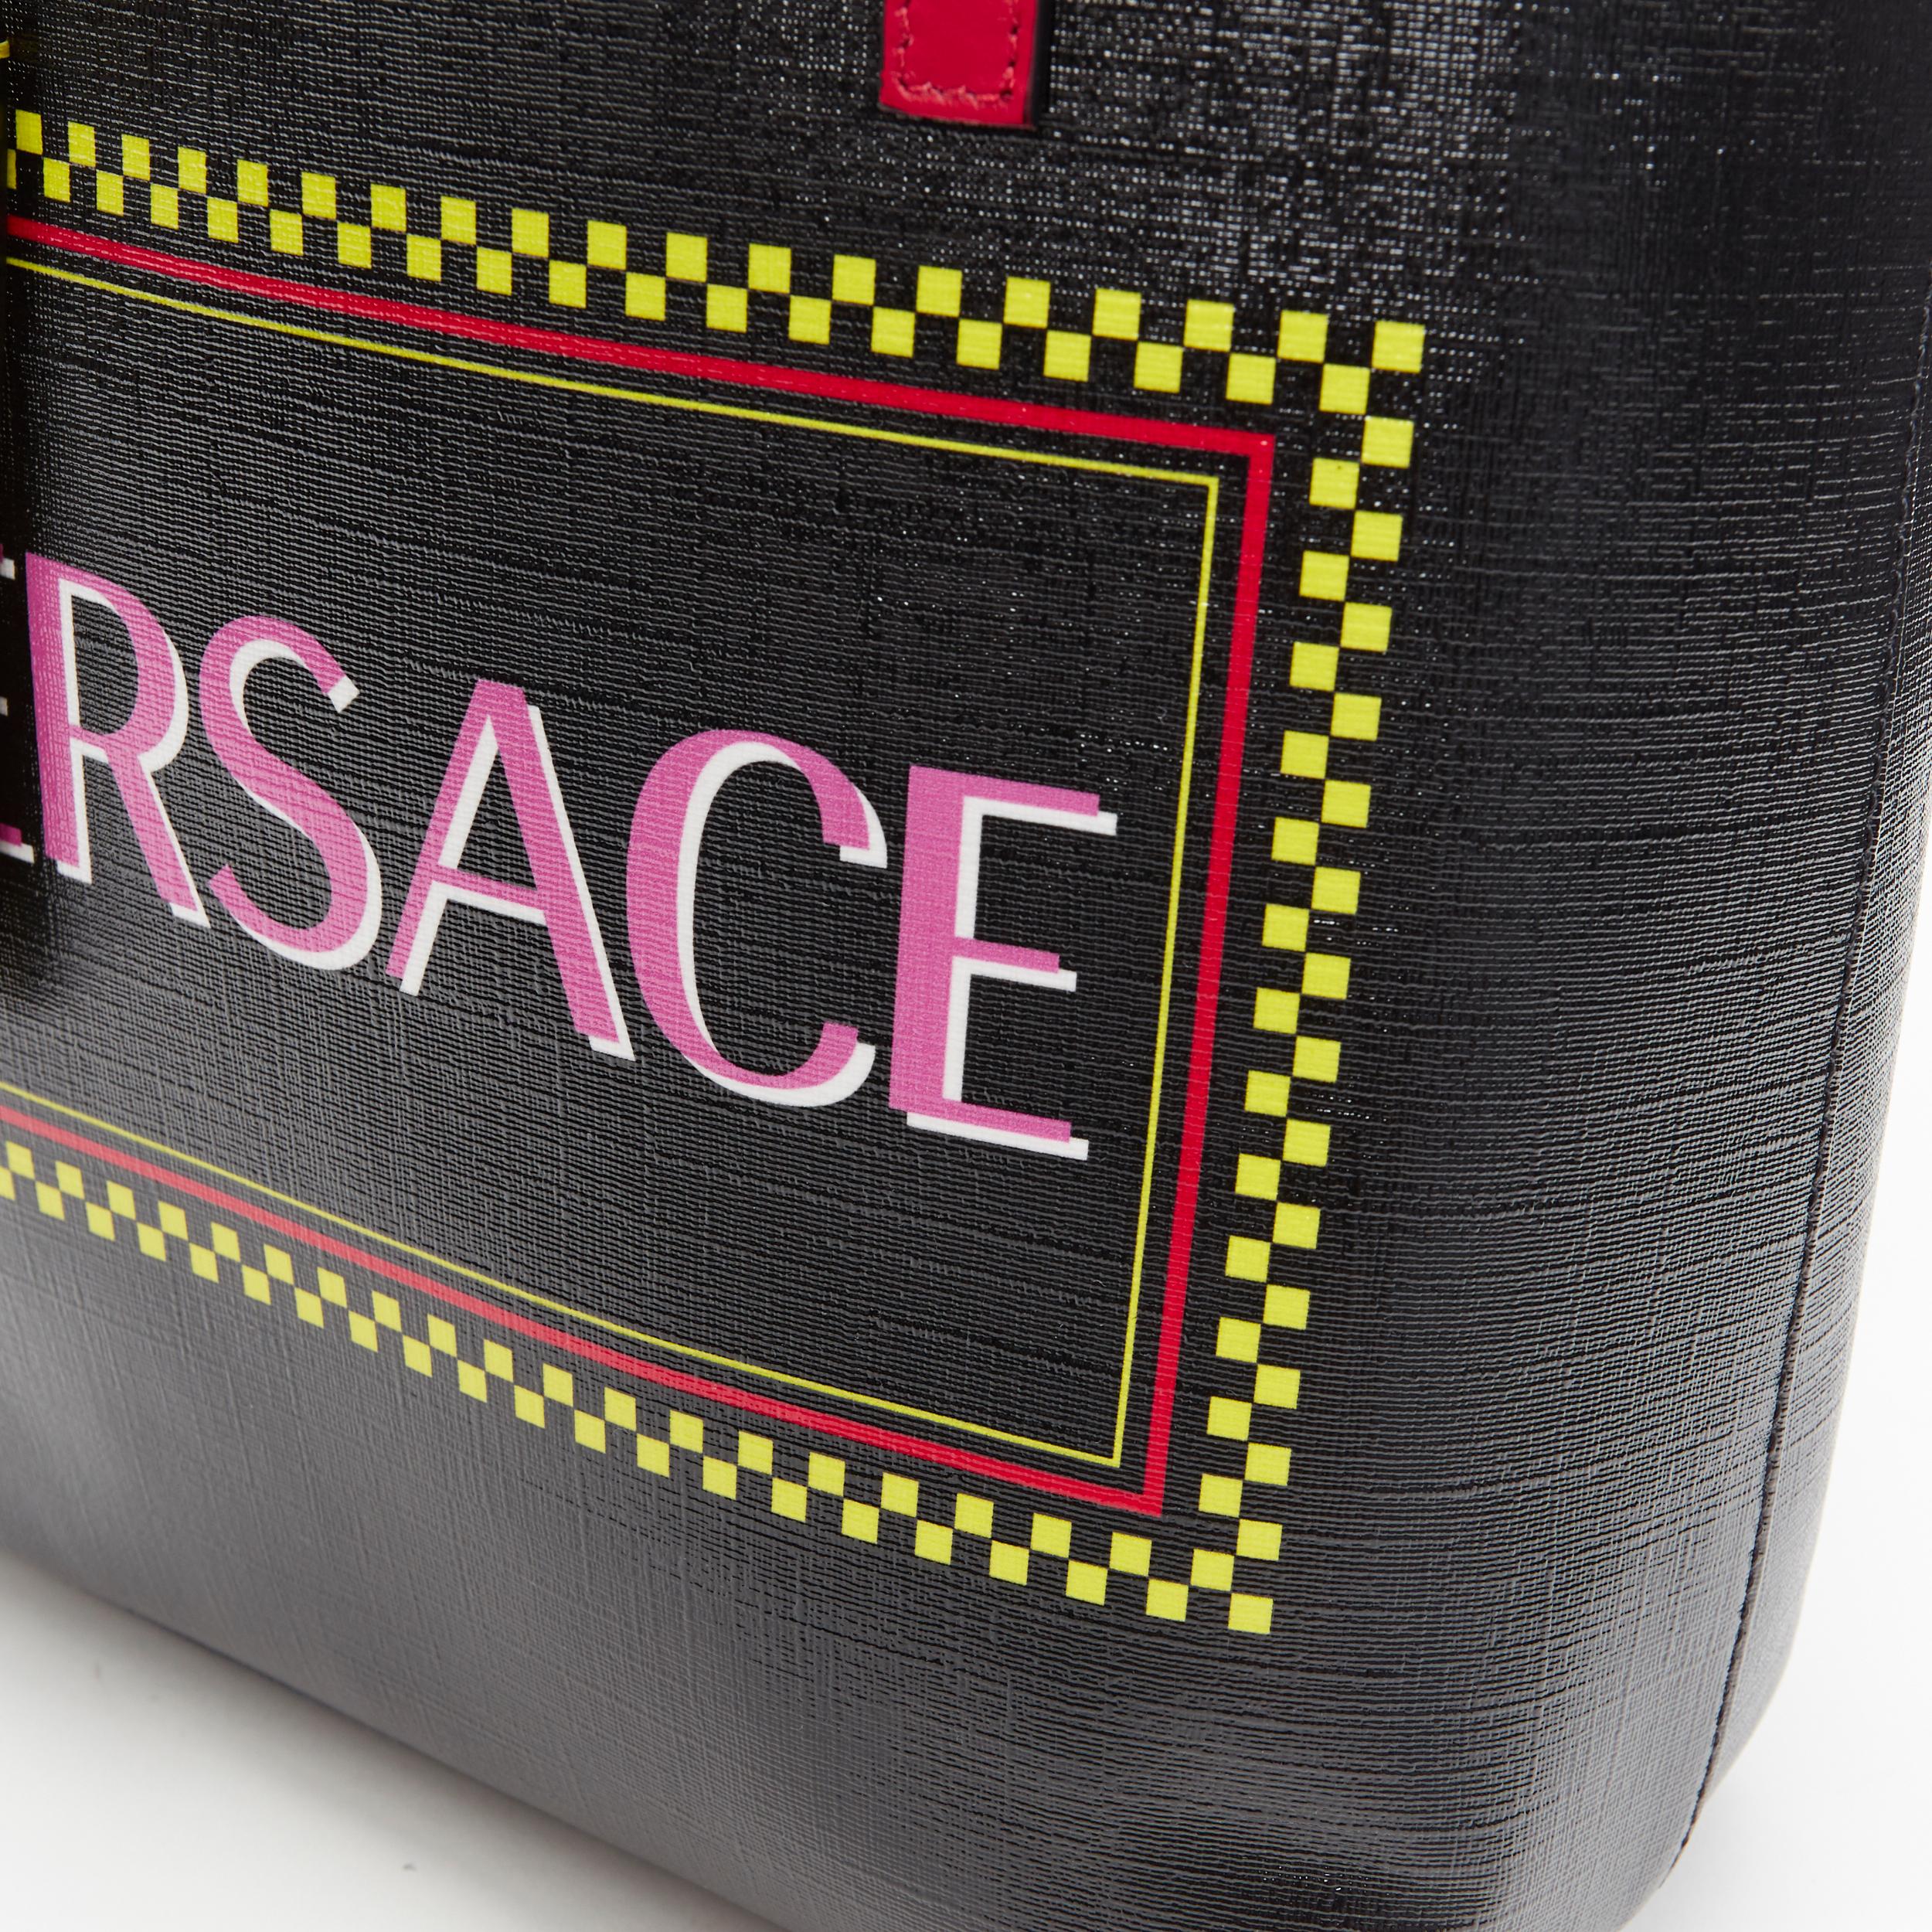 new VERSACE 90's logo black glossy saffiano leather yellow V tag small tote bag 4